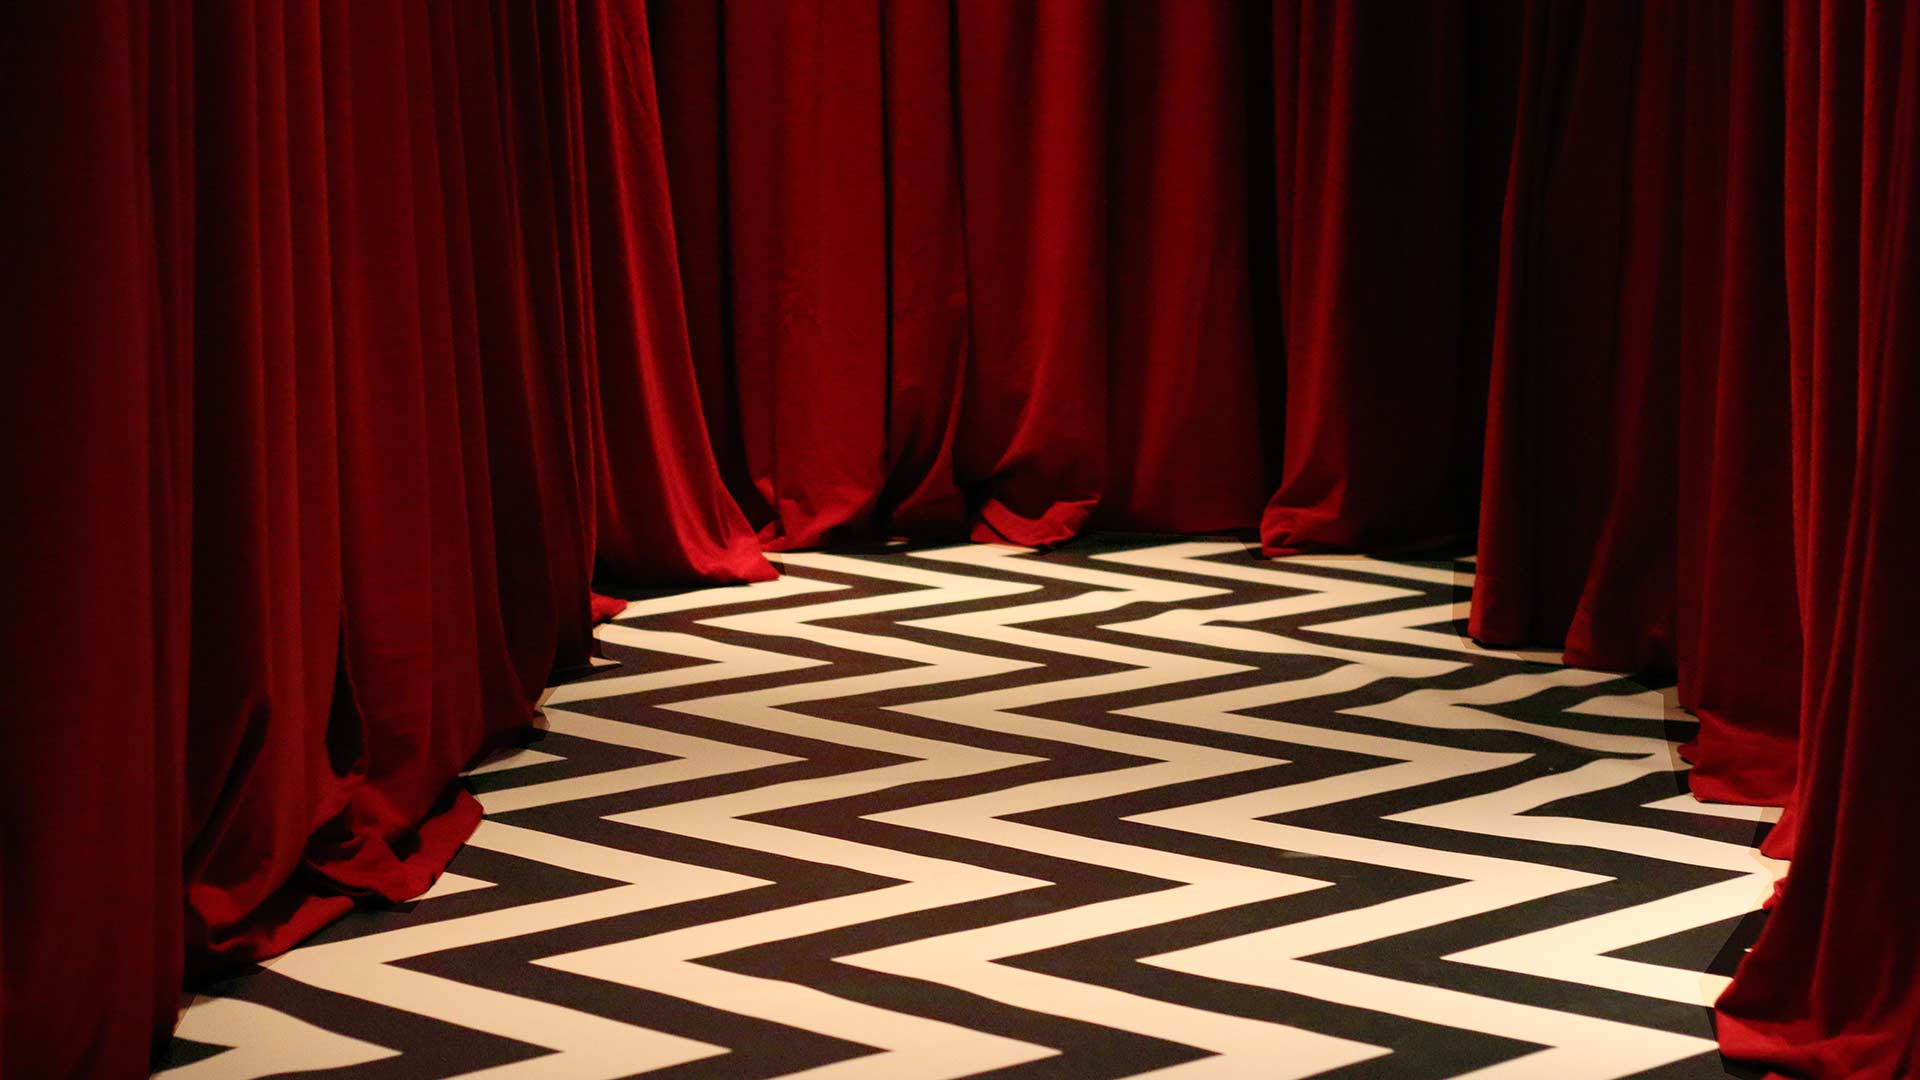 “Walk through the woods of Twin Peaks and feel the mystery.” Wallpaper